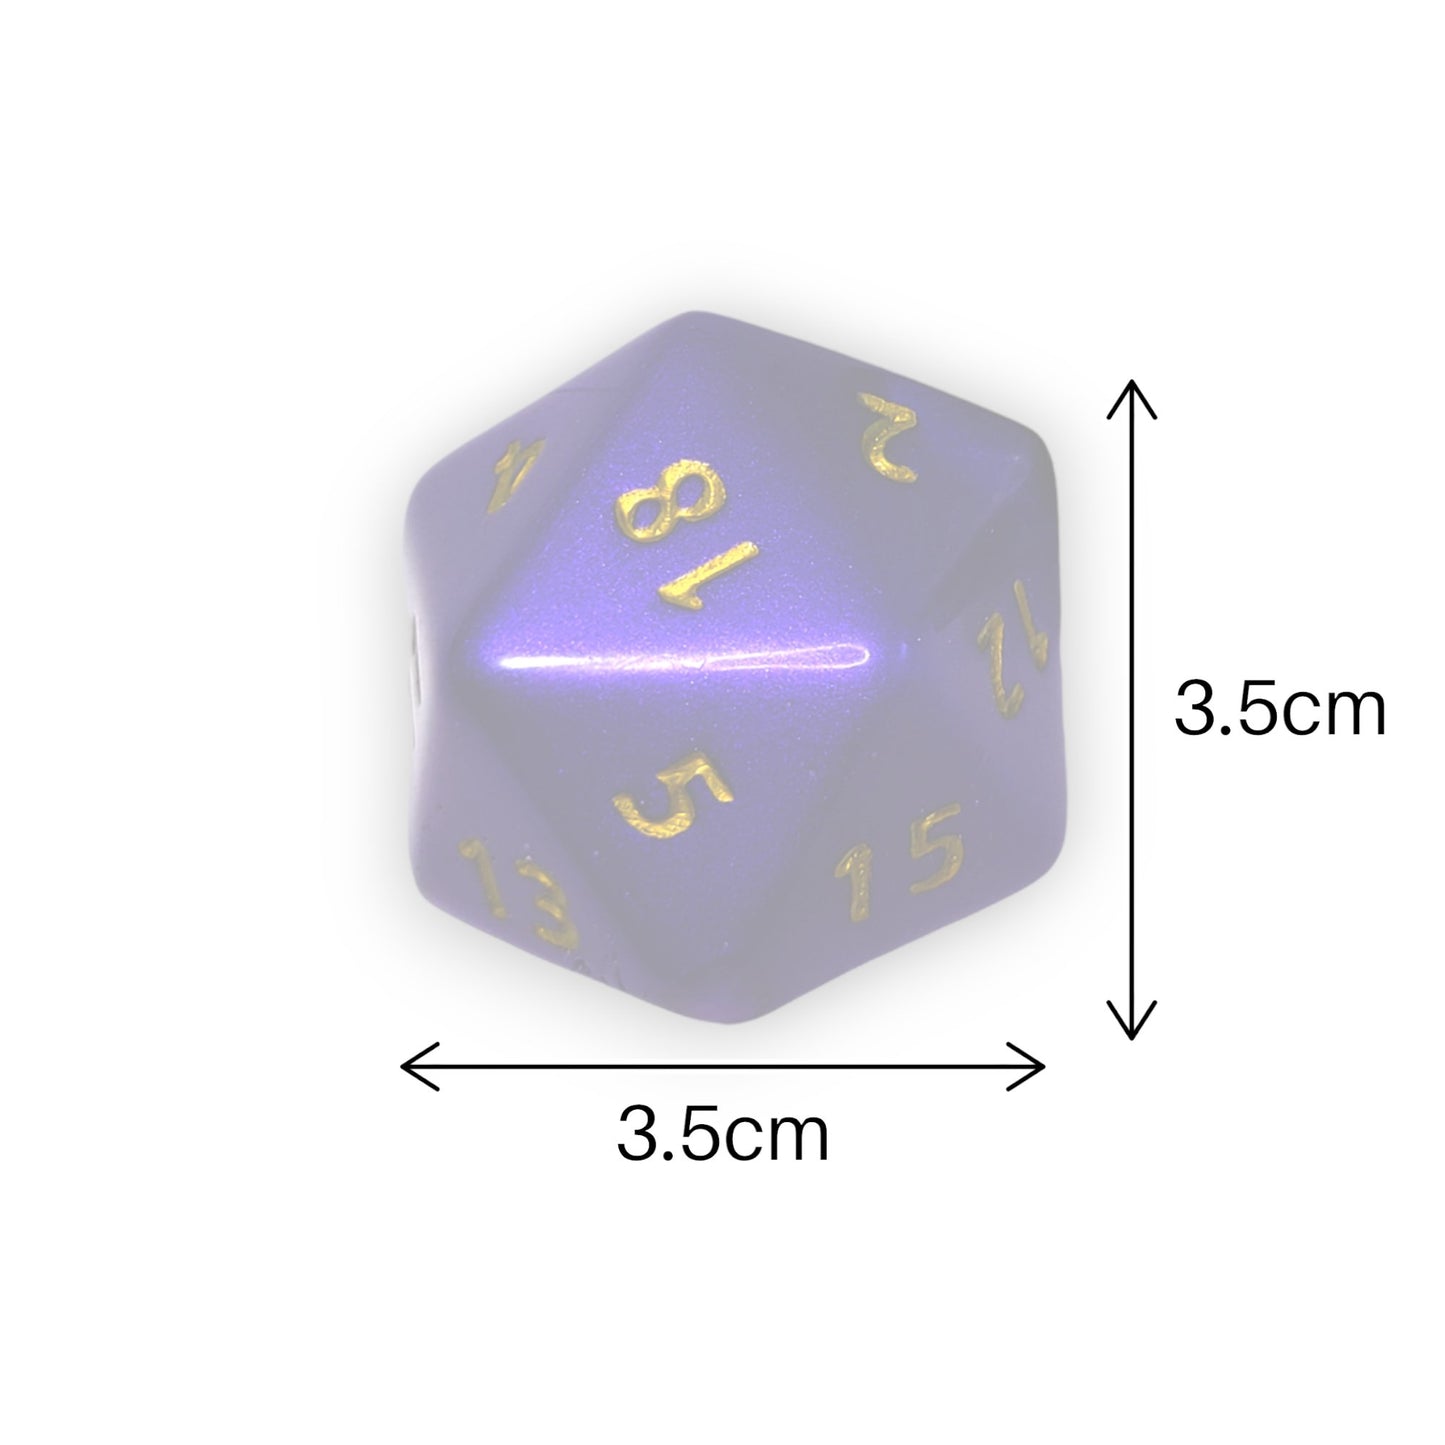 Customisable Large D20 Dice - The Cerulean Wolf